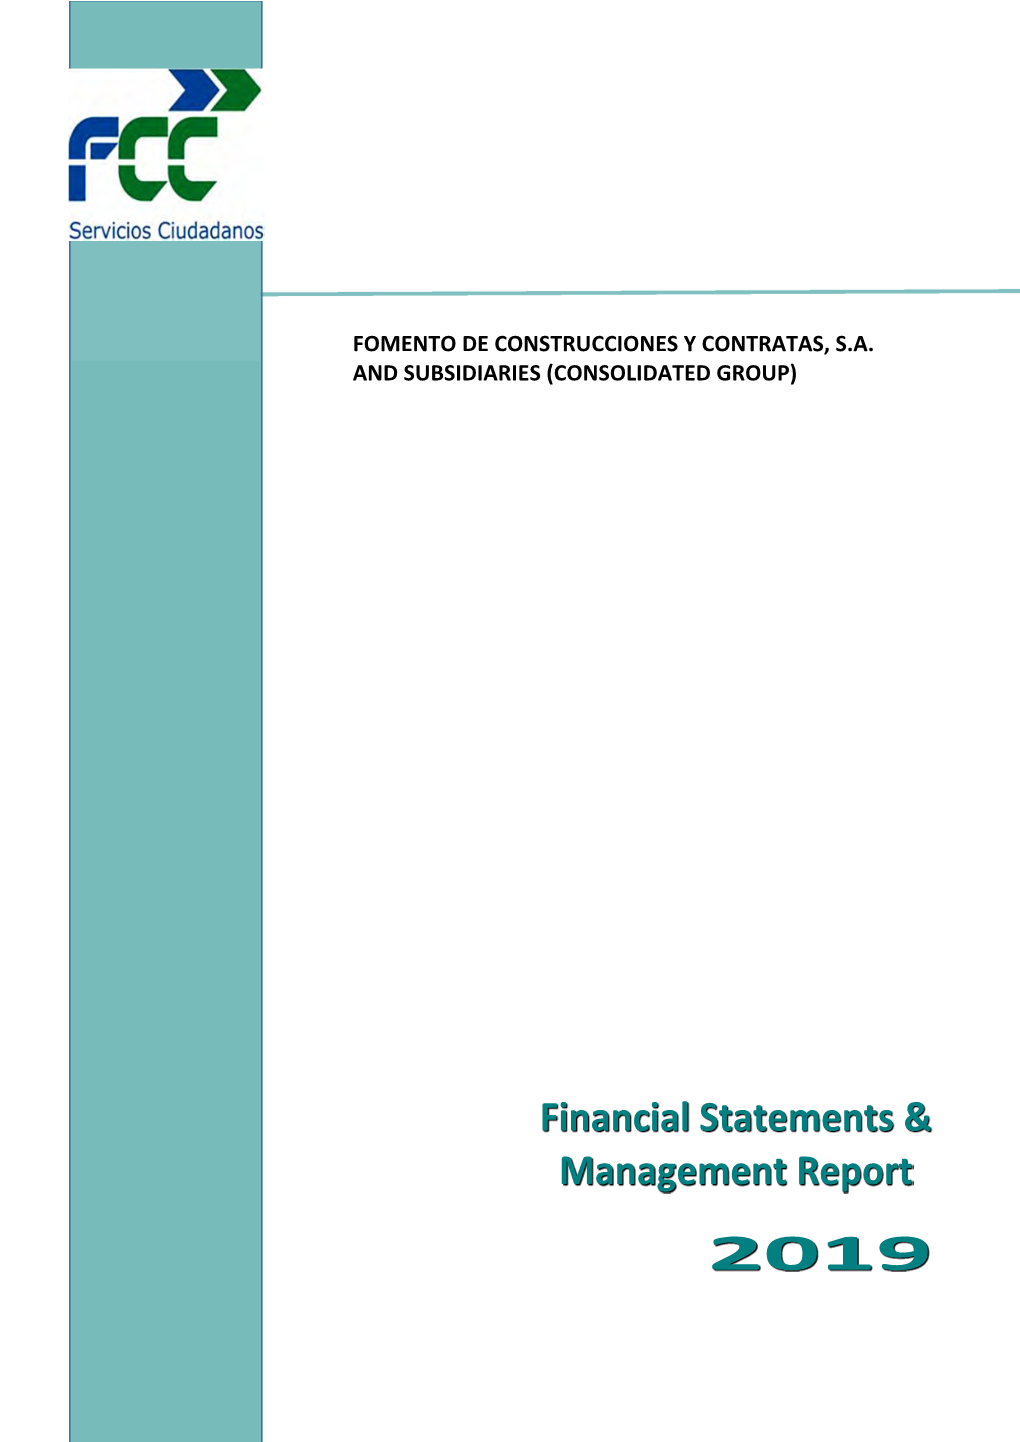 2019 Consolidated Financial Statements of the FCC Group Have Been Formulated by the Board of Directors of Fomento De Construcciones Y Contratas, S.A